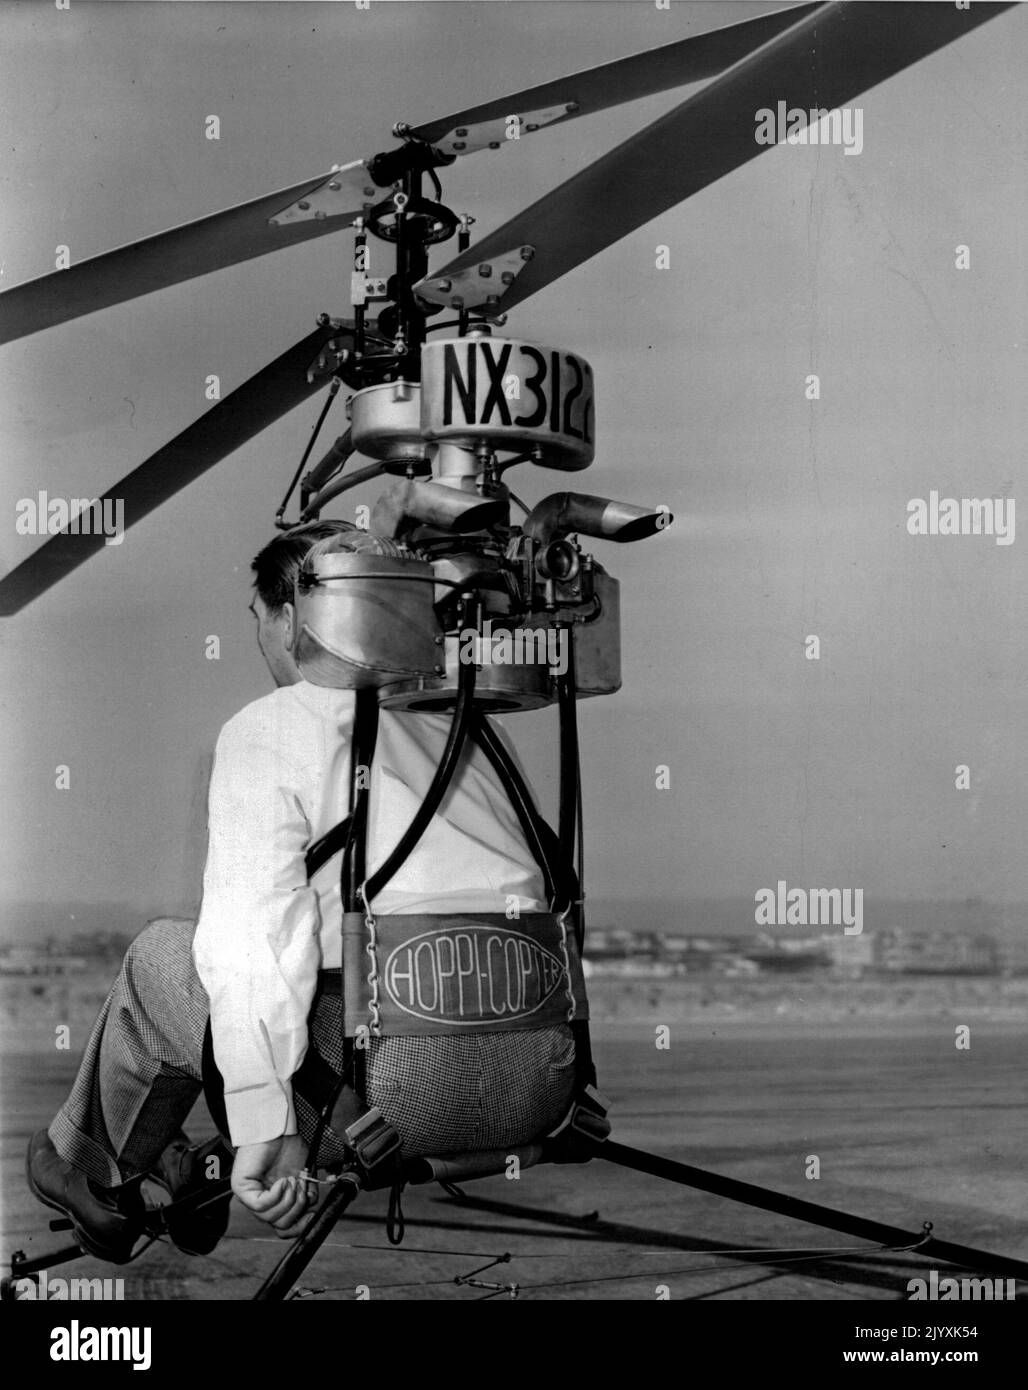 Air Motorcycle -- A rear view of the 'Hoppicopter' showing the left hand of the inventor, Horace Pentecost on the gas throttle. The pilot is strapped in just as in convention all planes. July 29, 1946. (Photo by Wide World Photos). Stock Photo